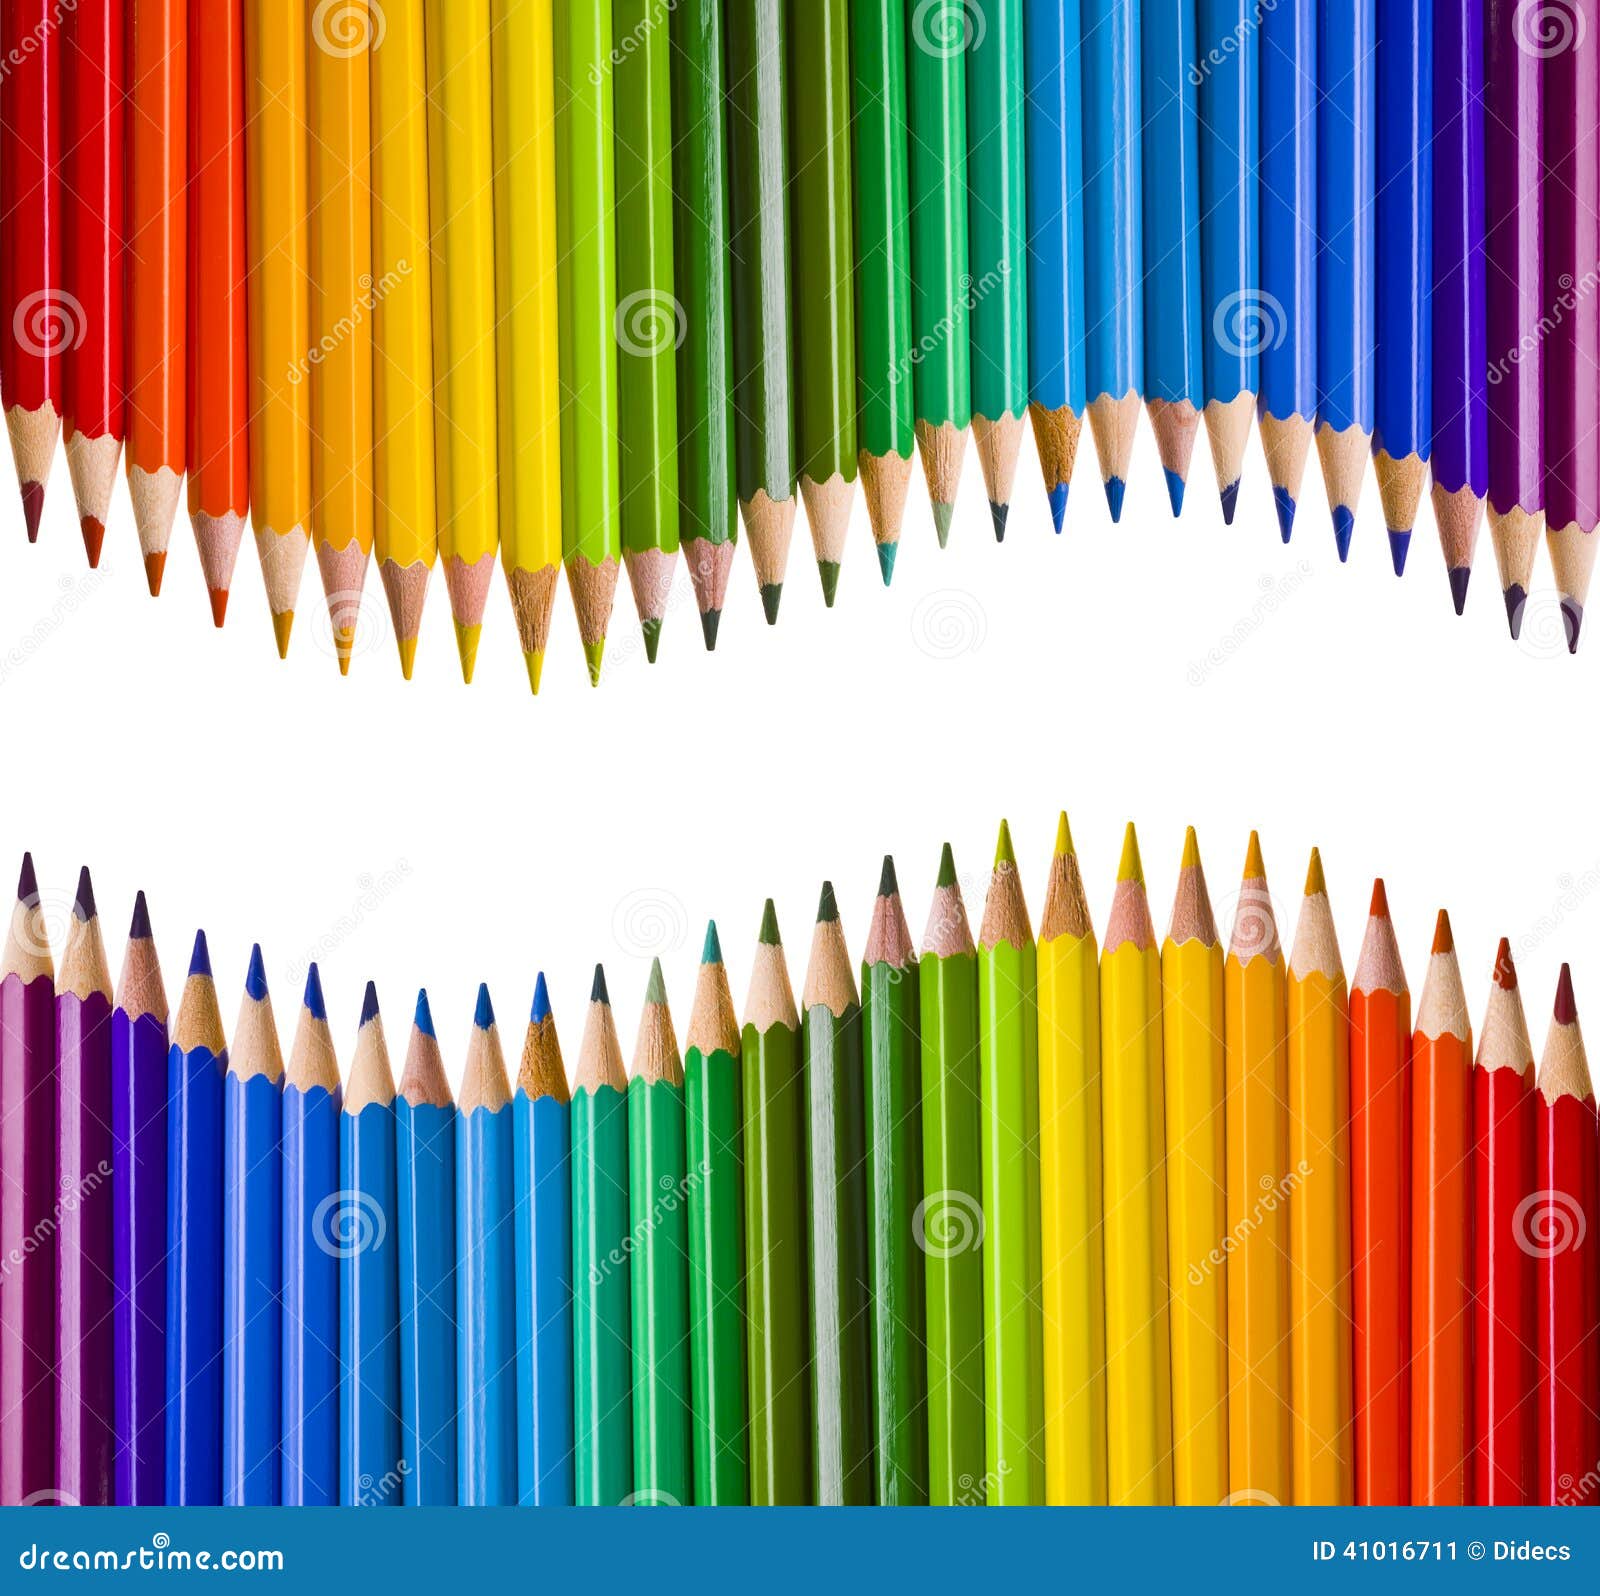 Two mirrored waves of colorful pencils on white